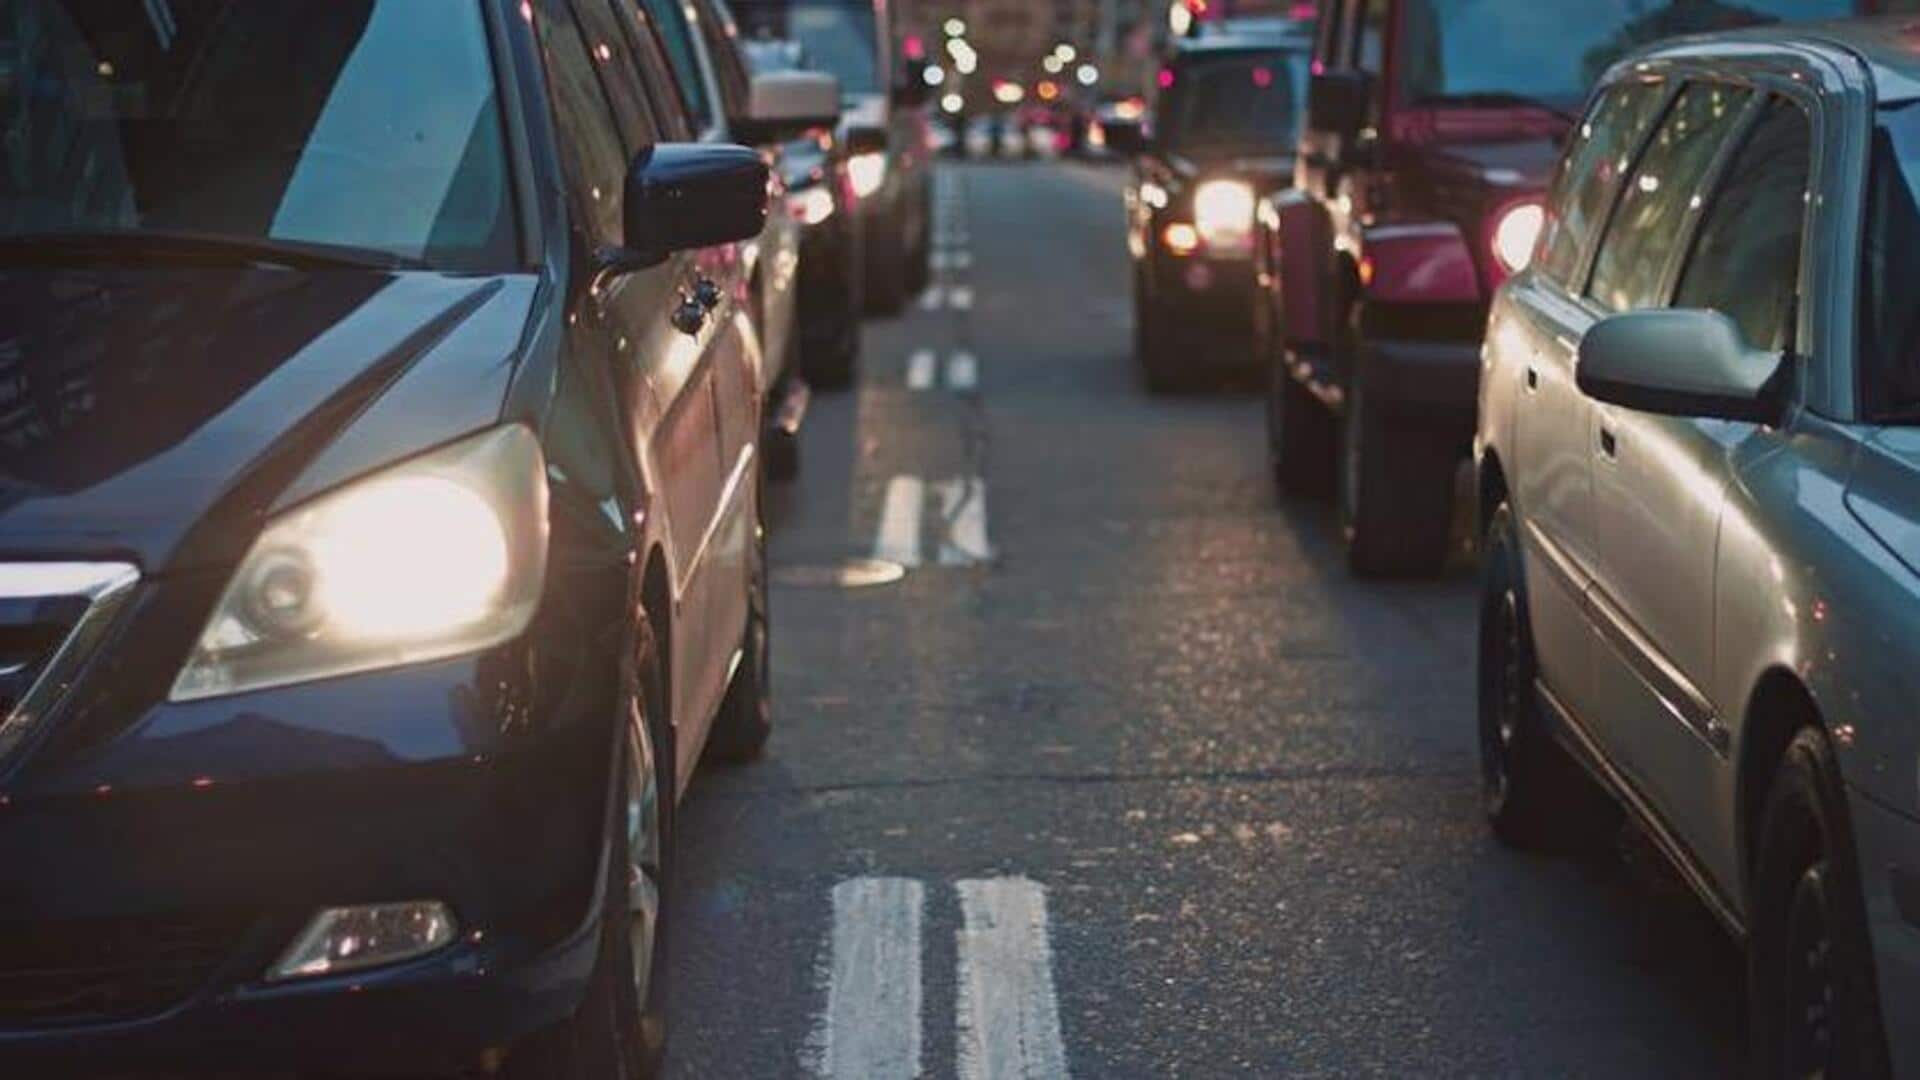 Getting real-time traffic updates just got easier! Here's how